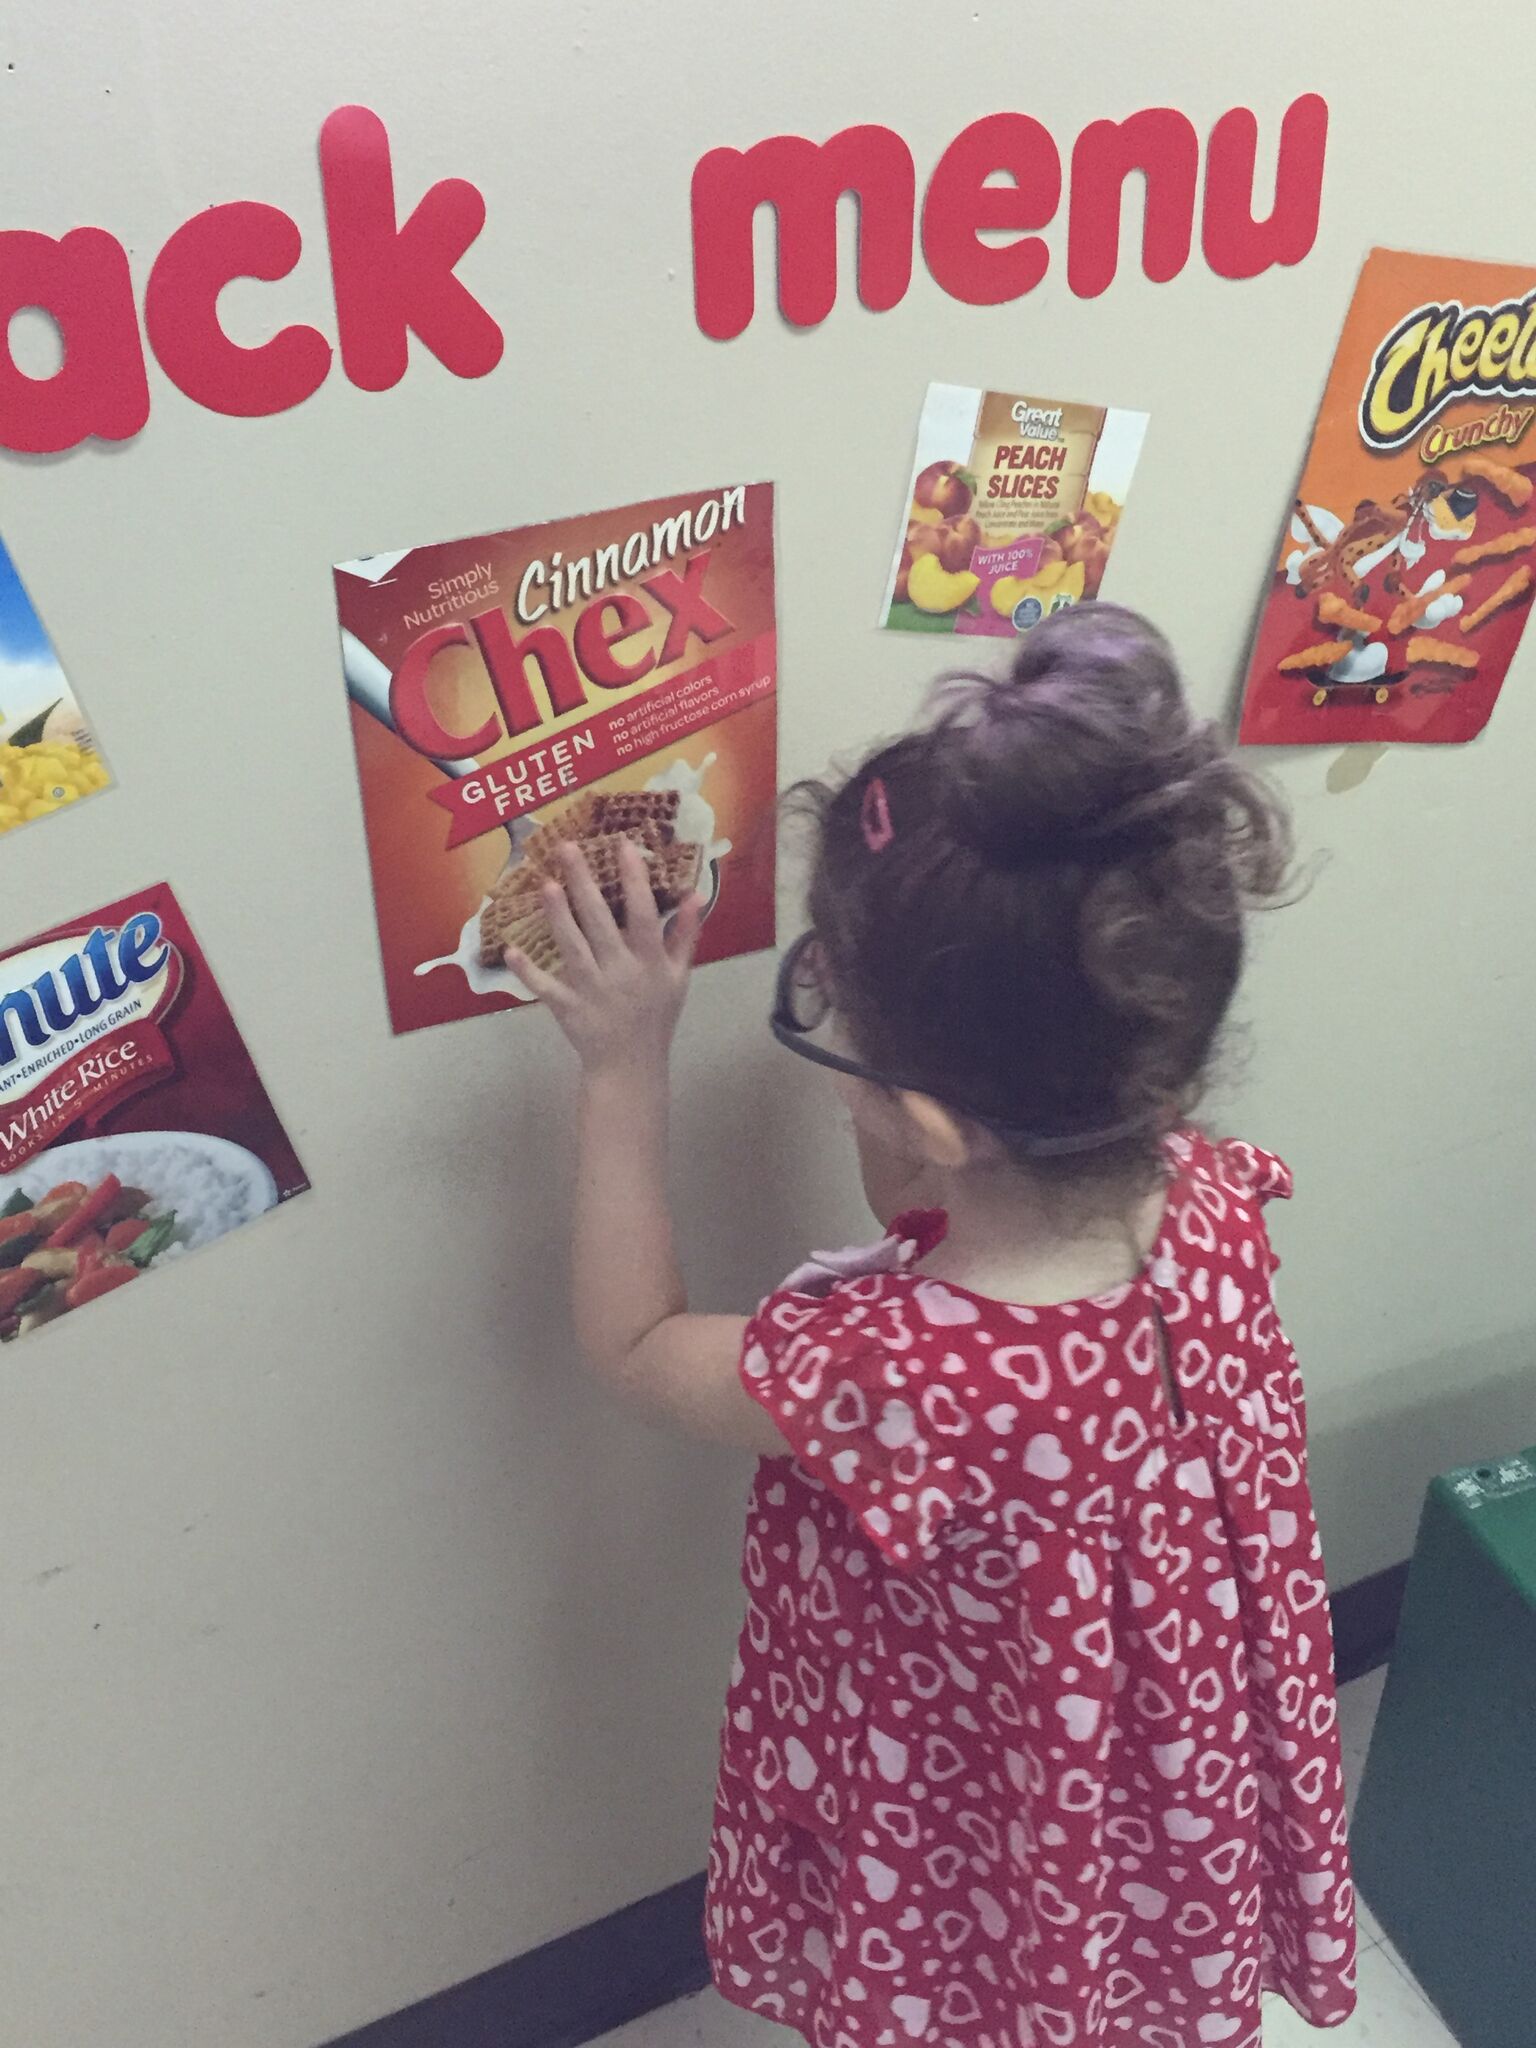 A girl chooses Cinnamon Chex from the Snack Menu wall.